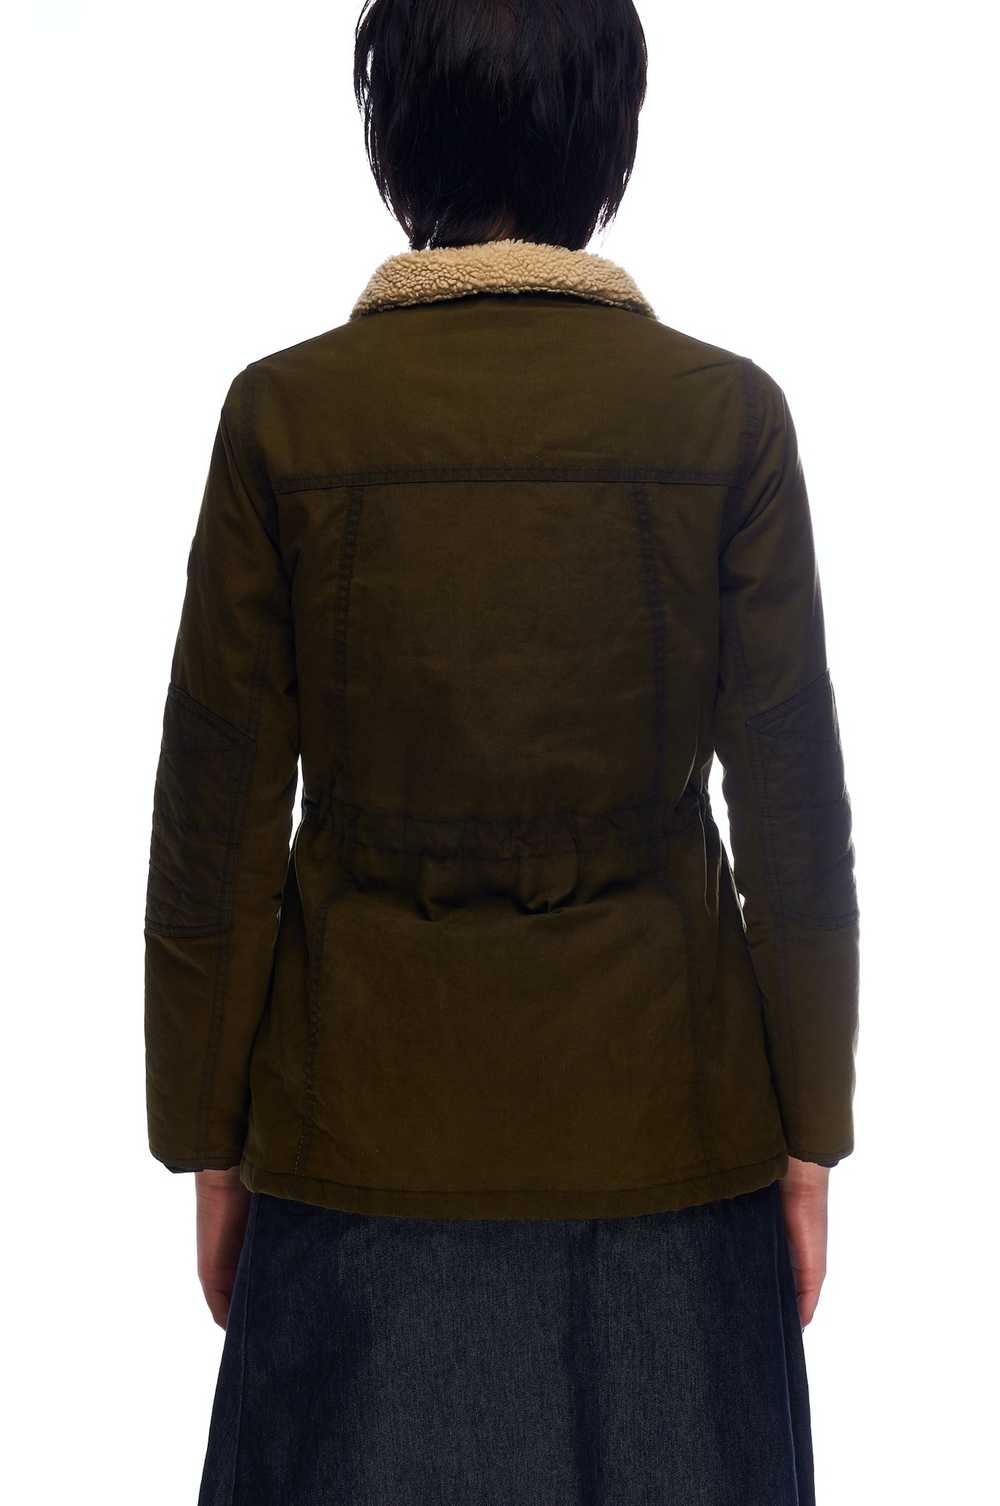 Barbour BARBOUR Jacket Olive Green Wax Cotton - image 4